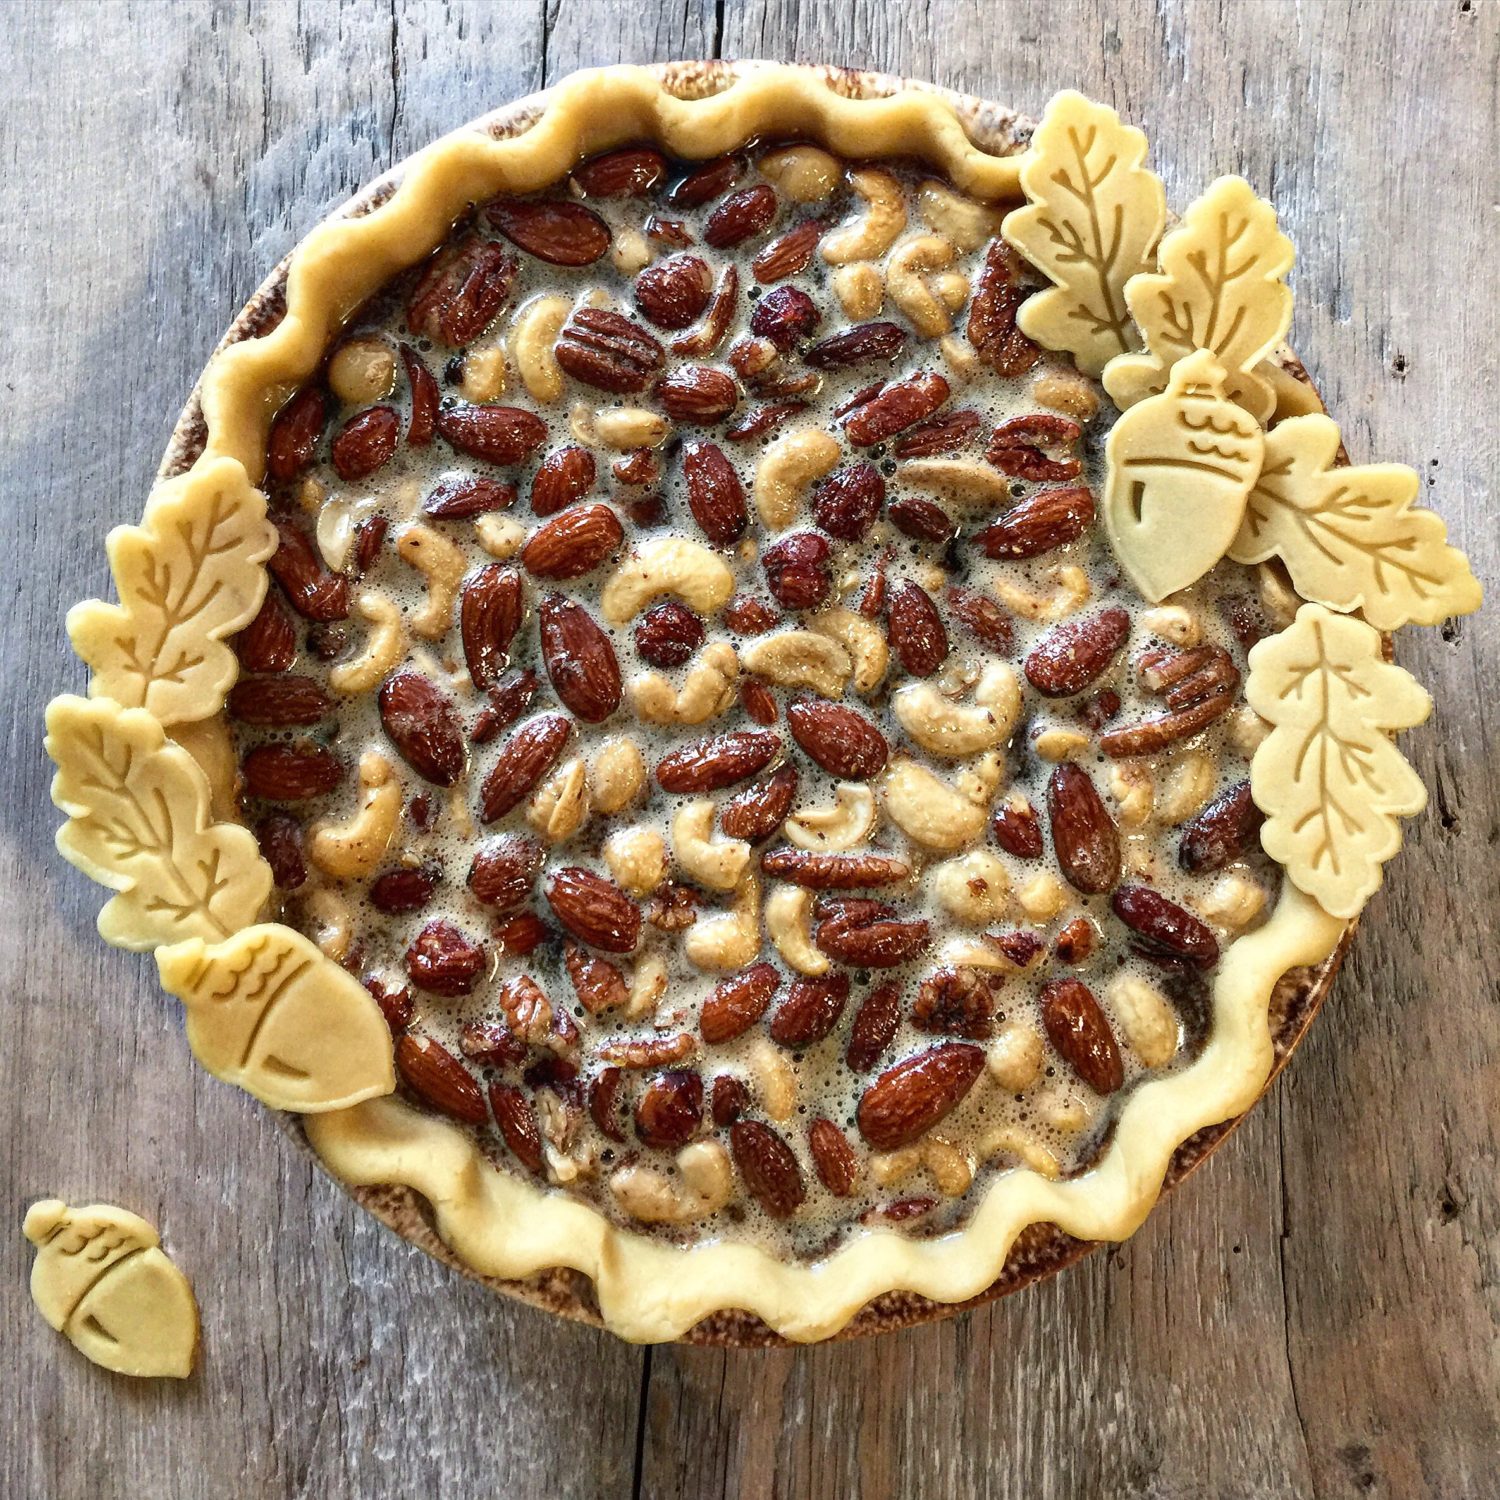 Spiced Mixed Nuts Pie